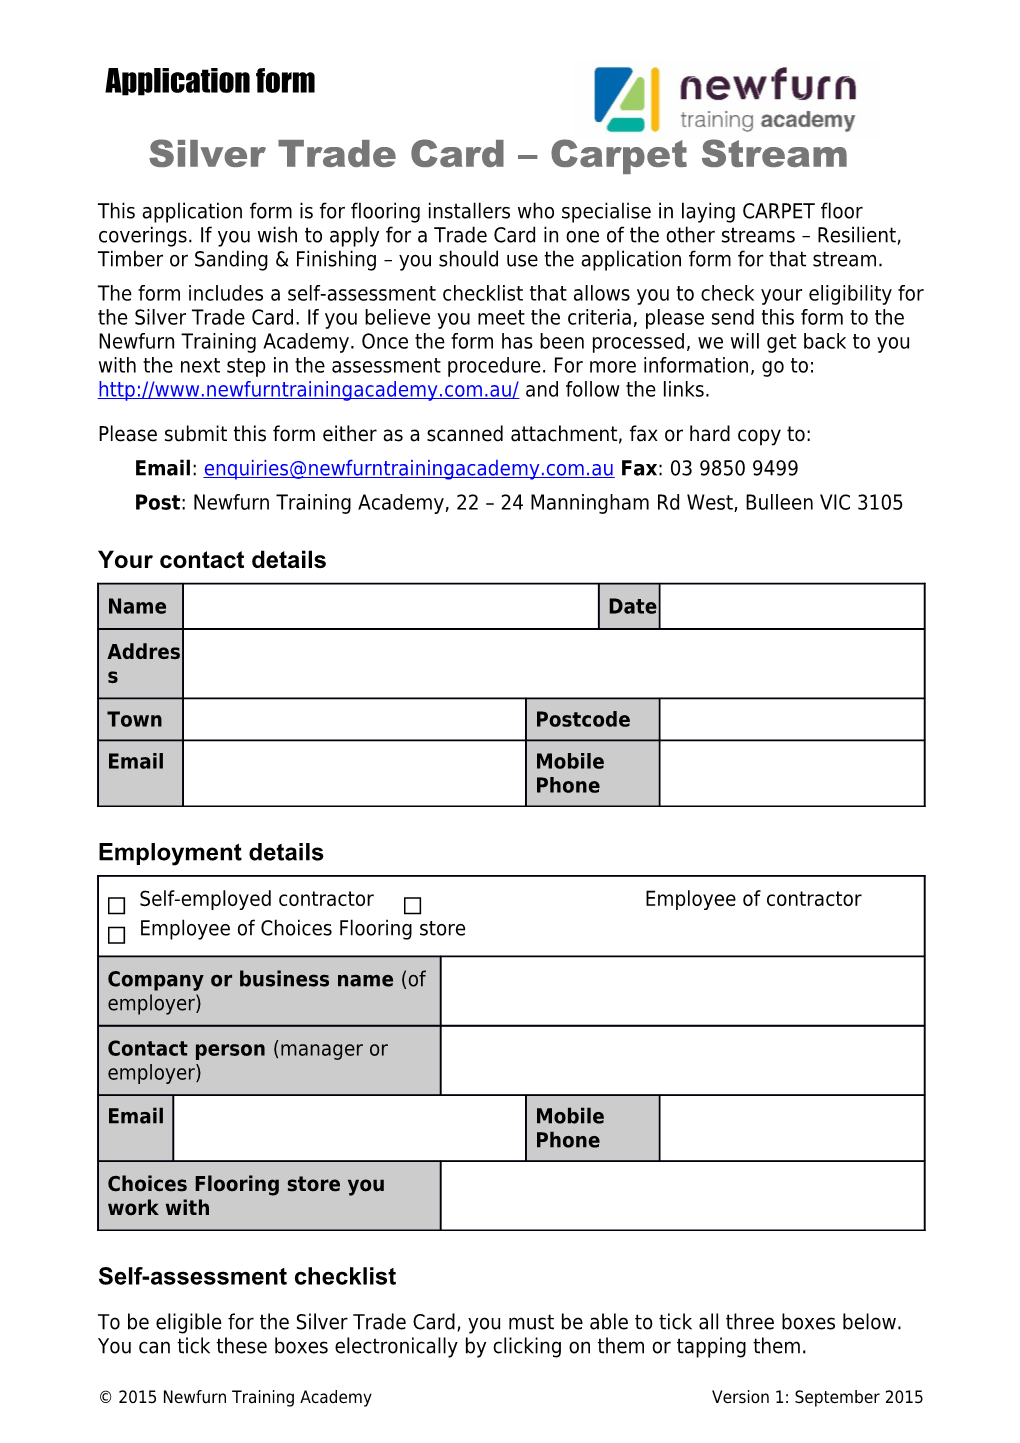 Silver Trade Card Application Form1